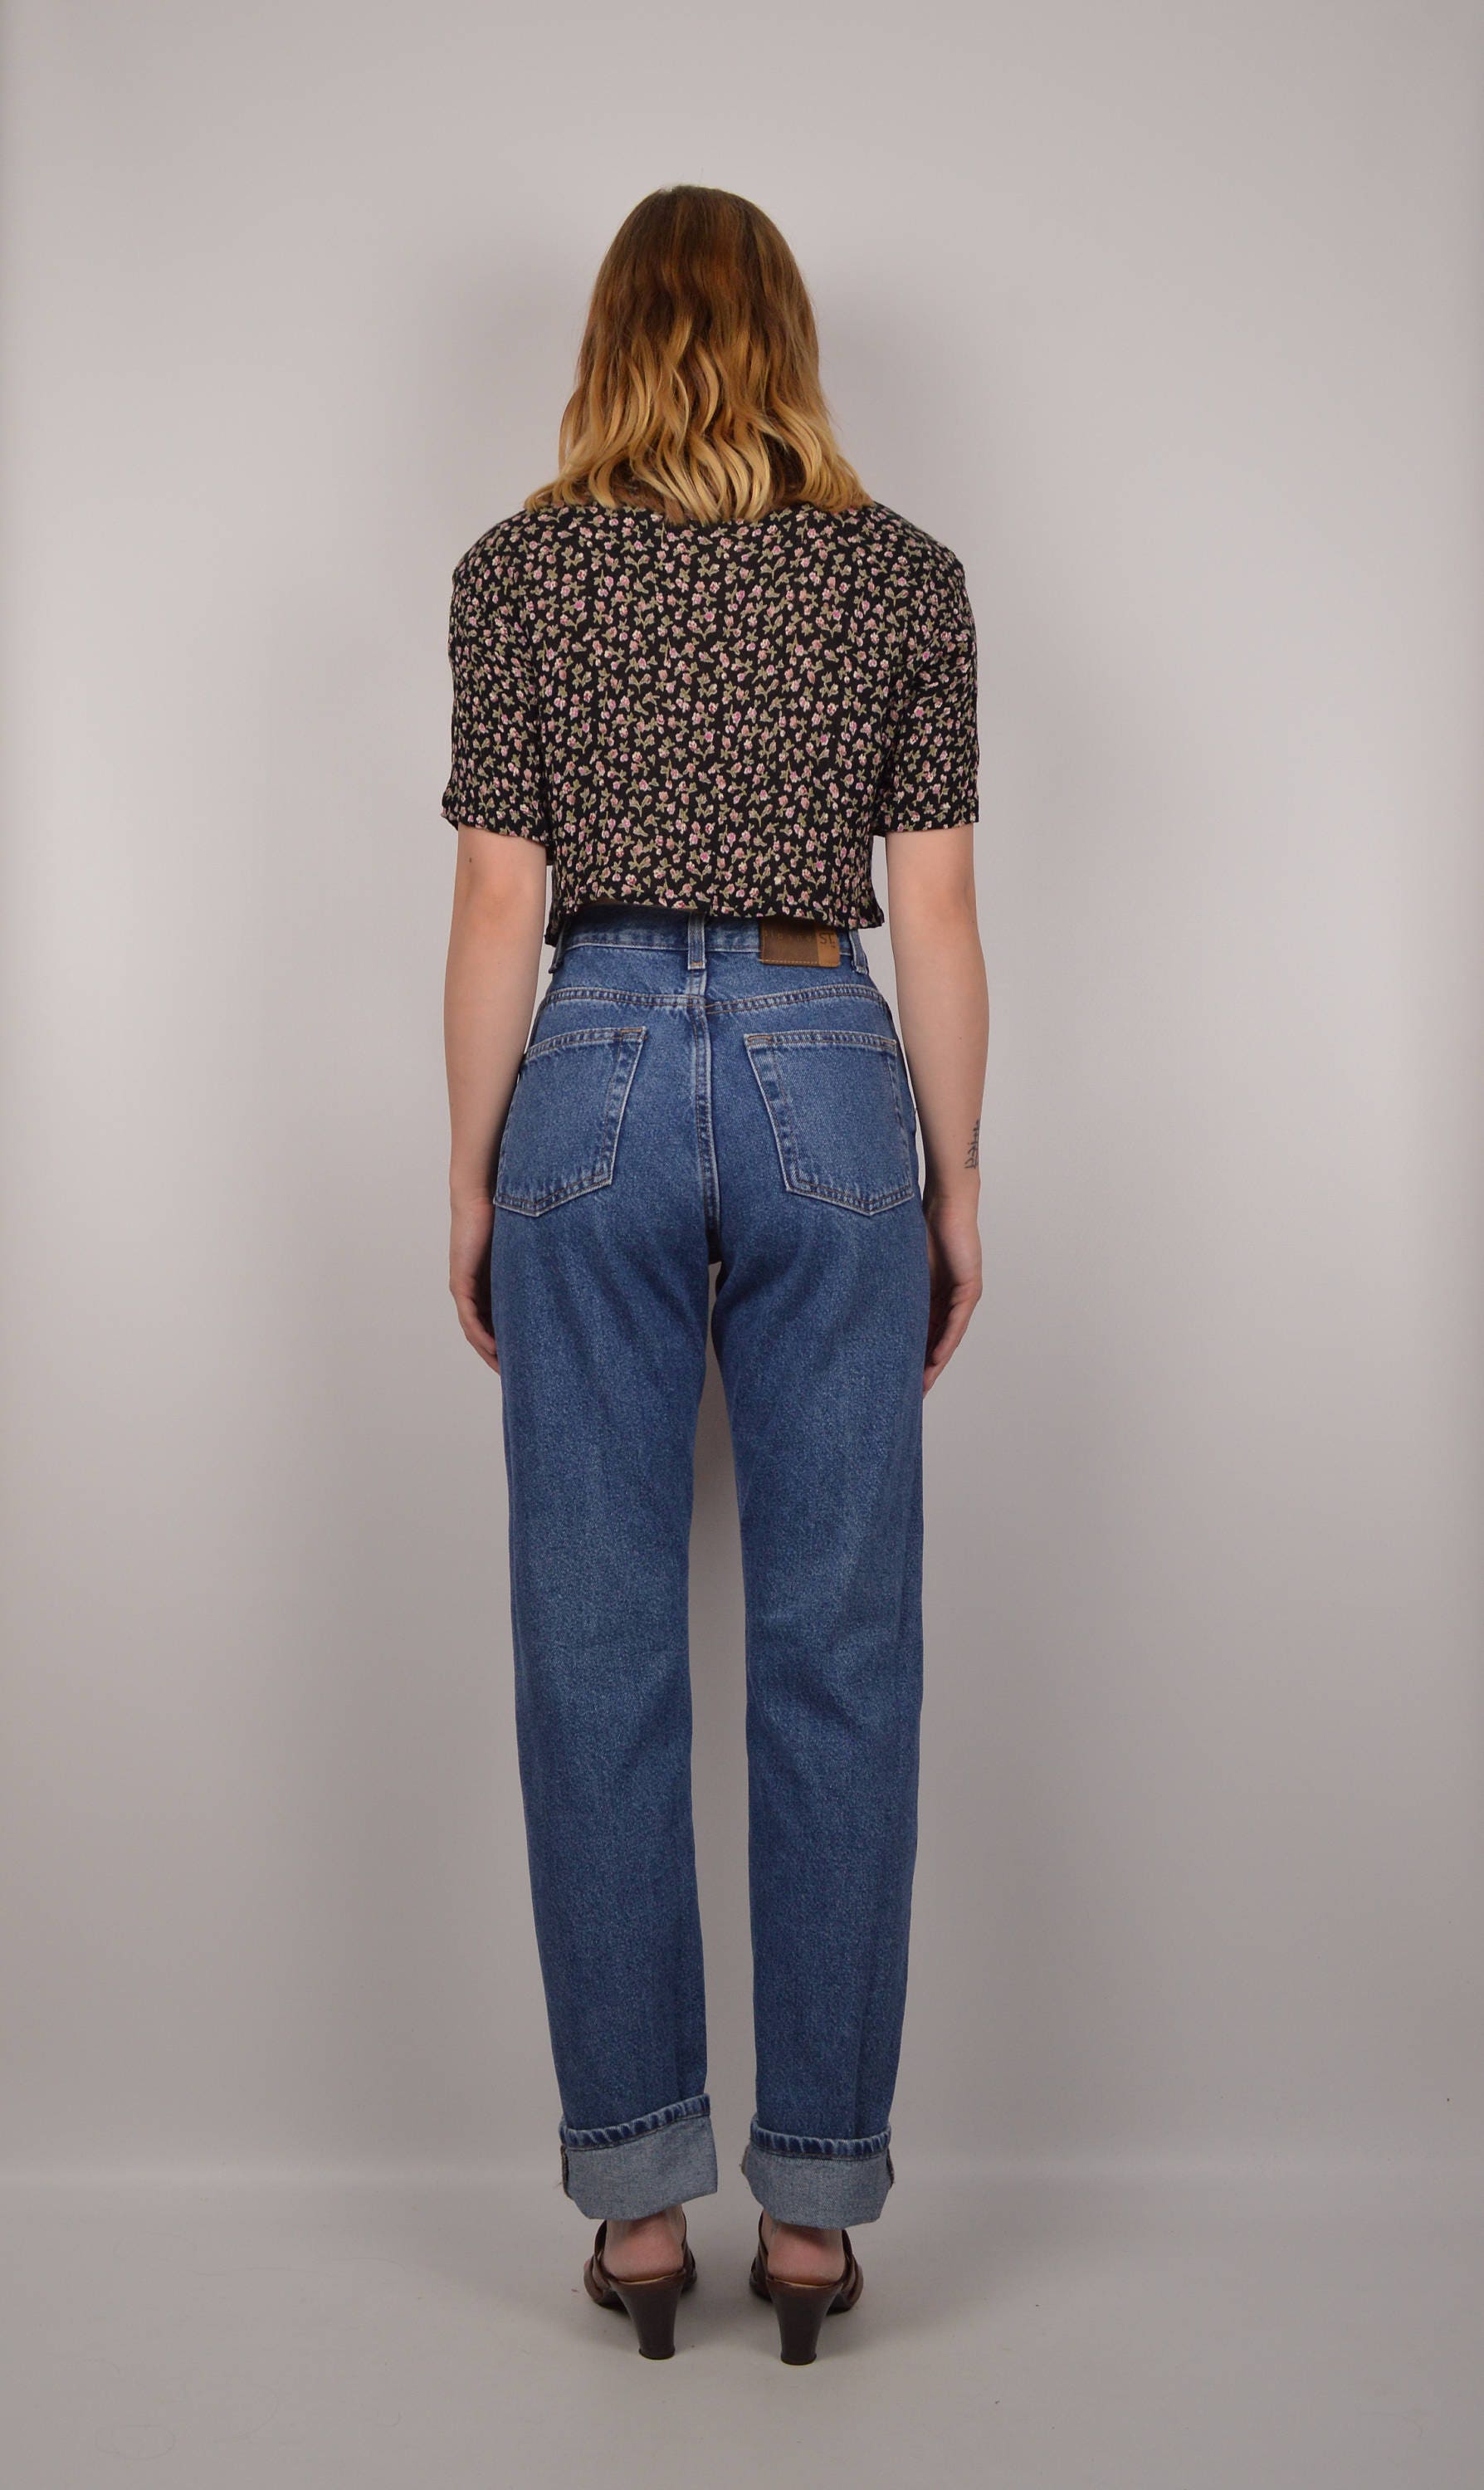 20% OFF Vintage Relaxed Fit High Waist Jeans